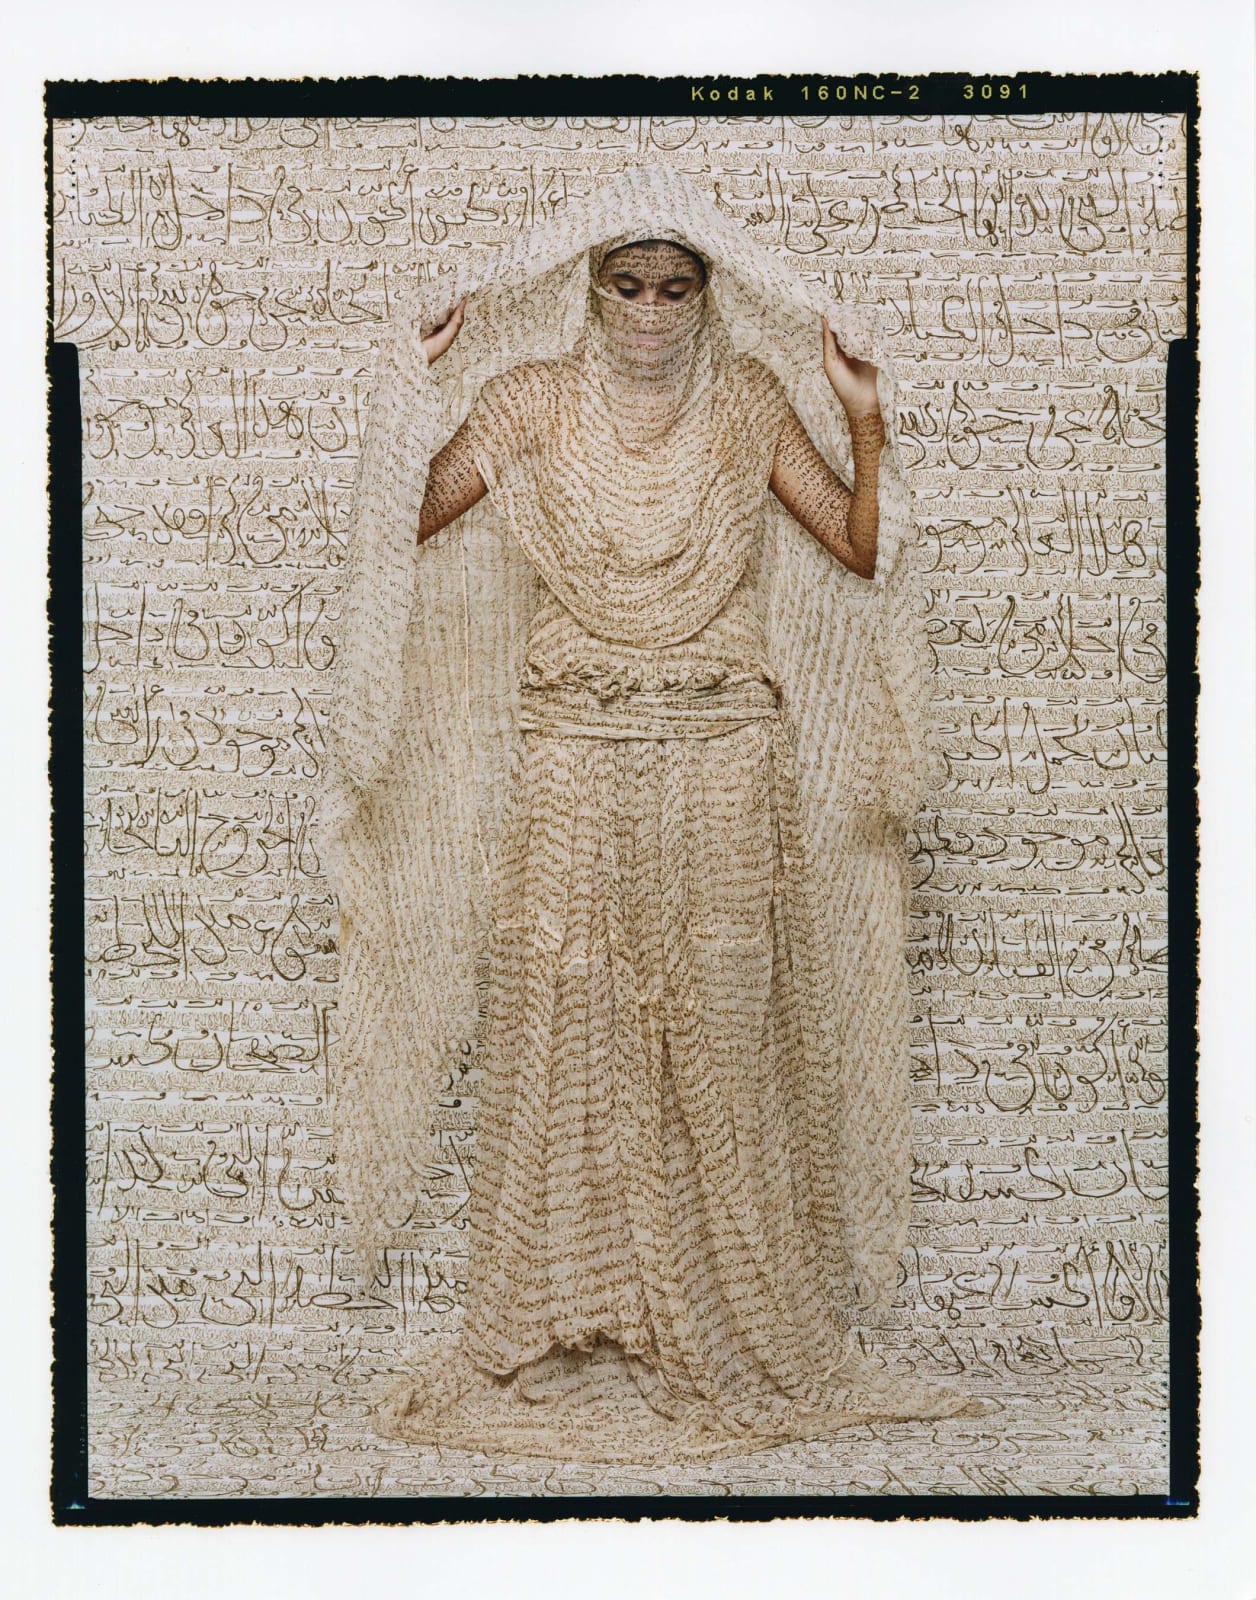 Lalla Essaydi Les Femmes du Maroc, woman lifting fabric from her body, her skin and all fabric inscribed with Arabic calligraphy in henna